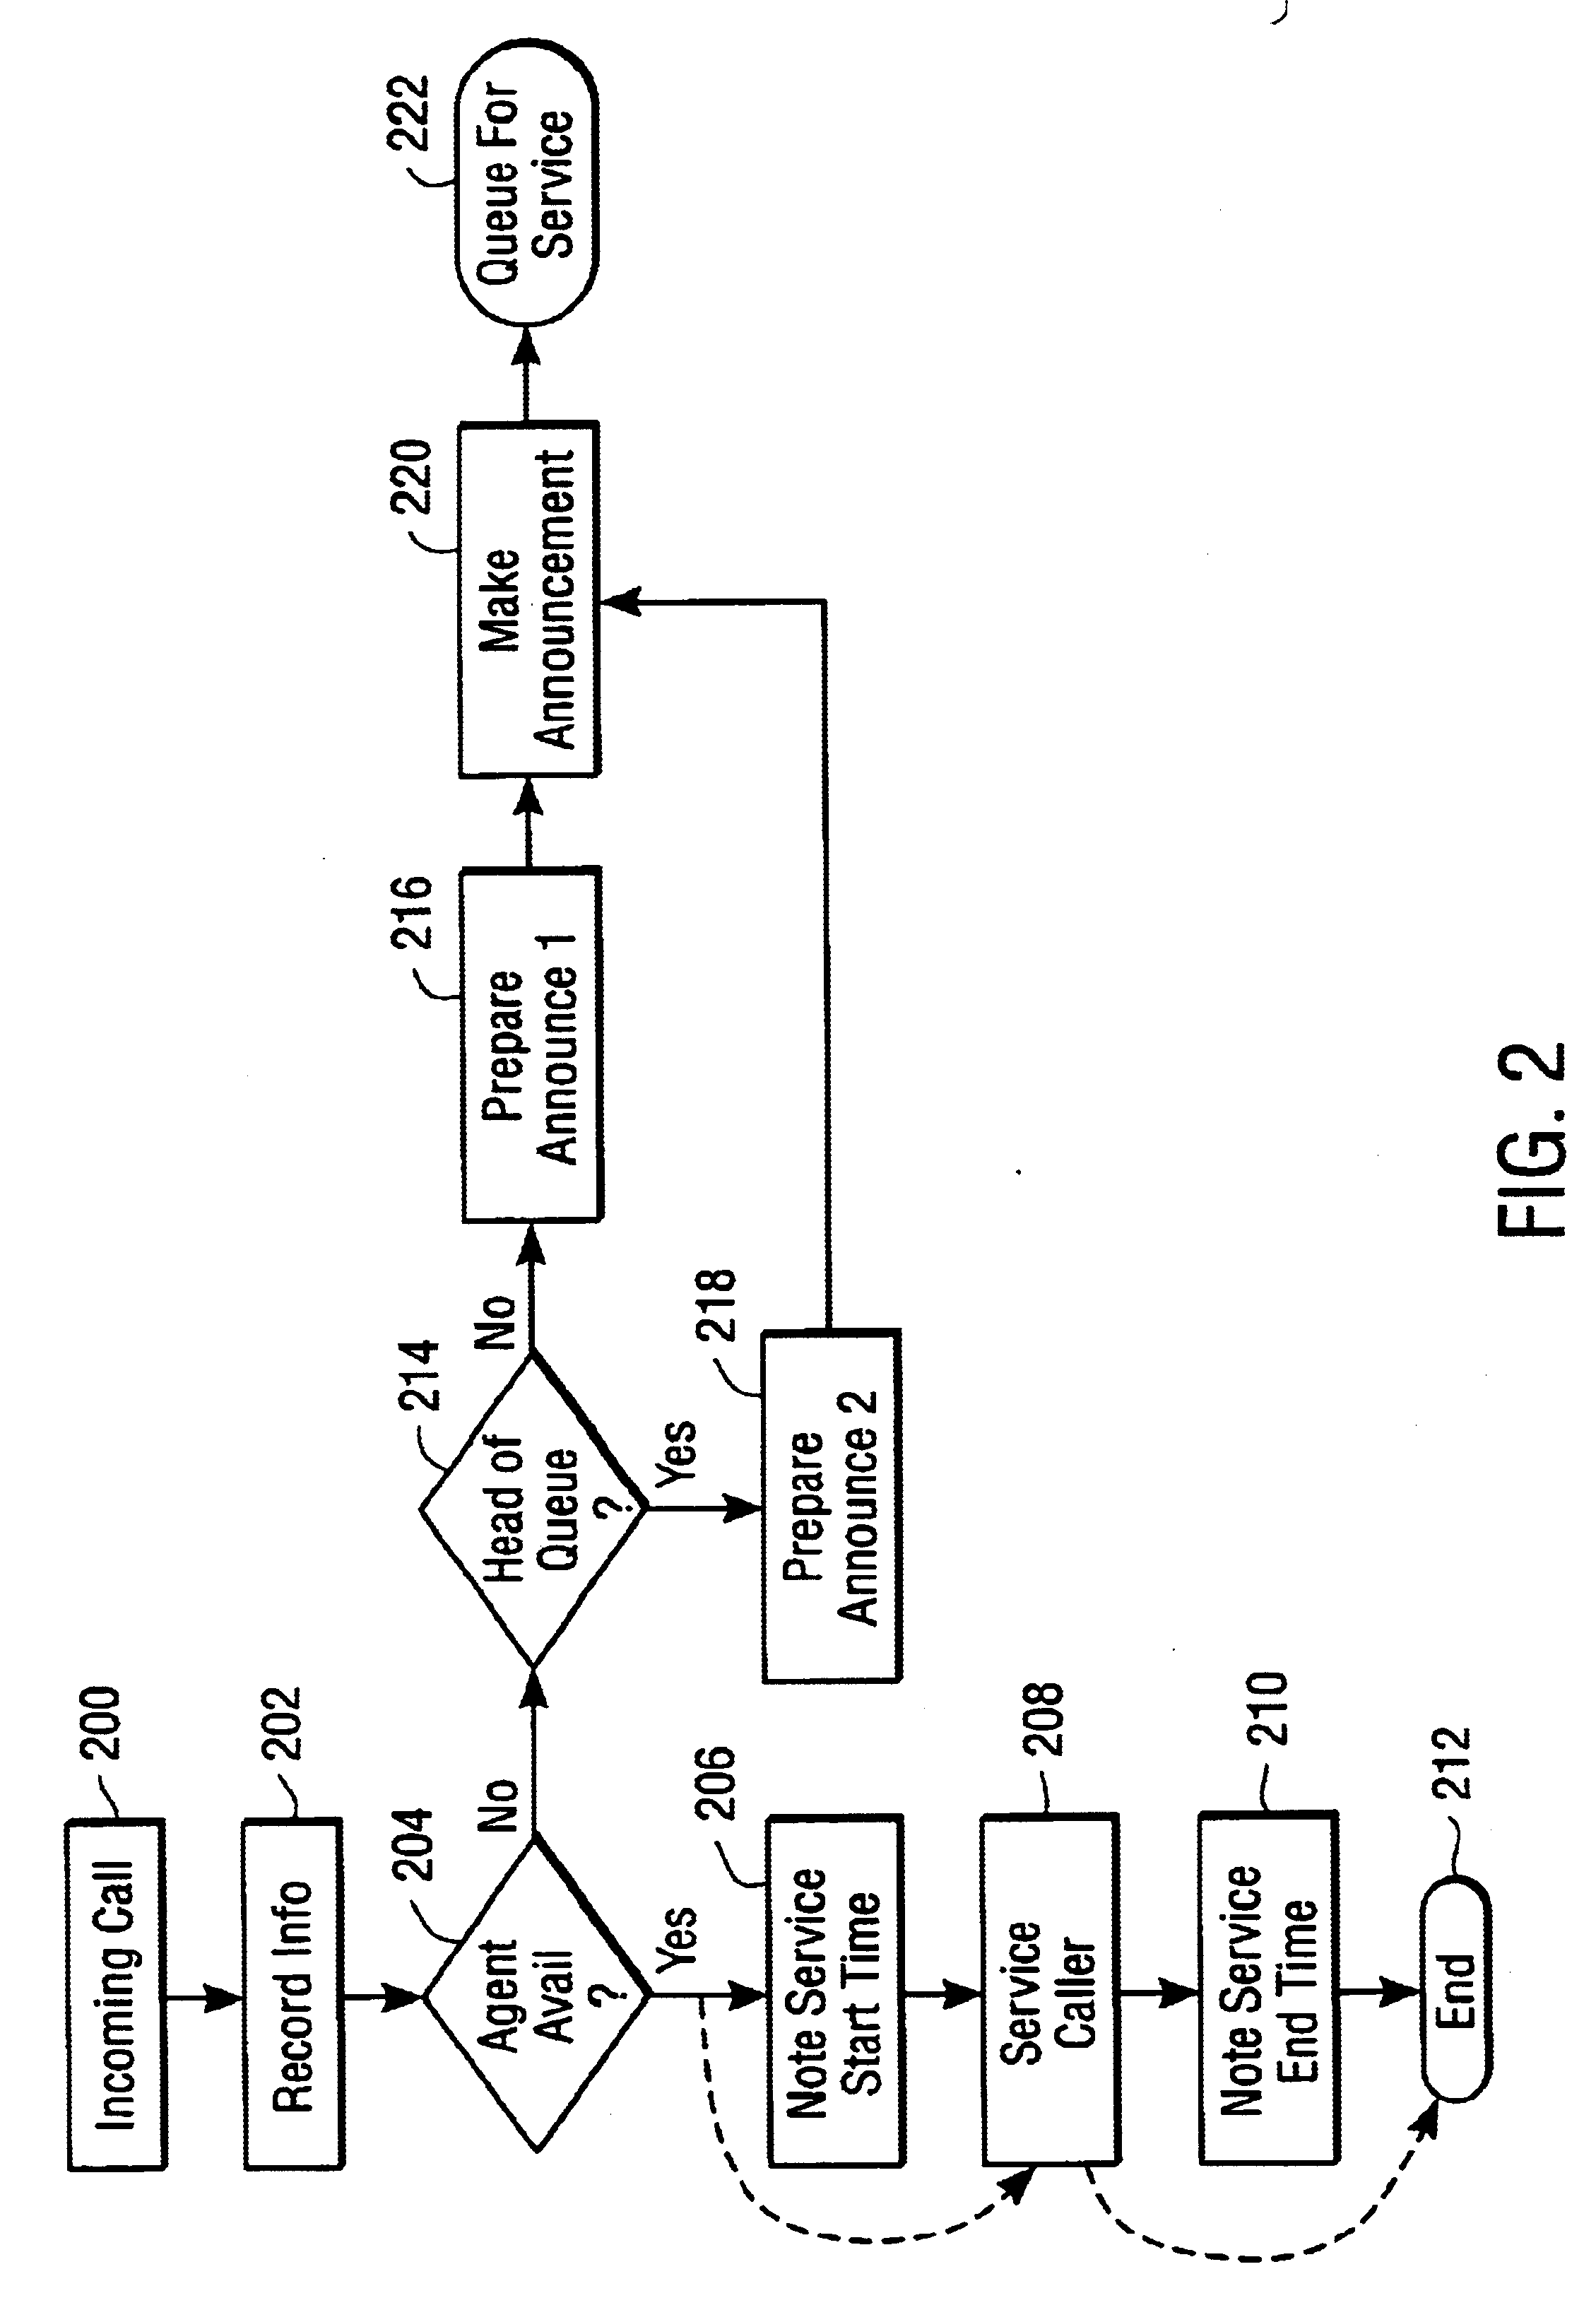 System and method for implementing wait time estimation in automatic call distribution queues